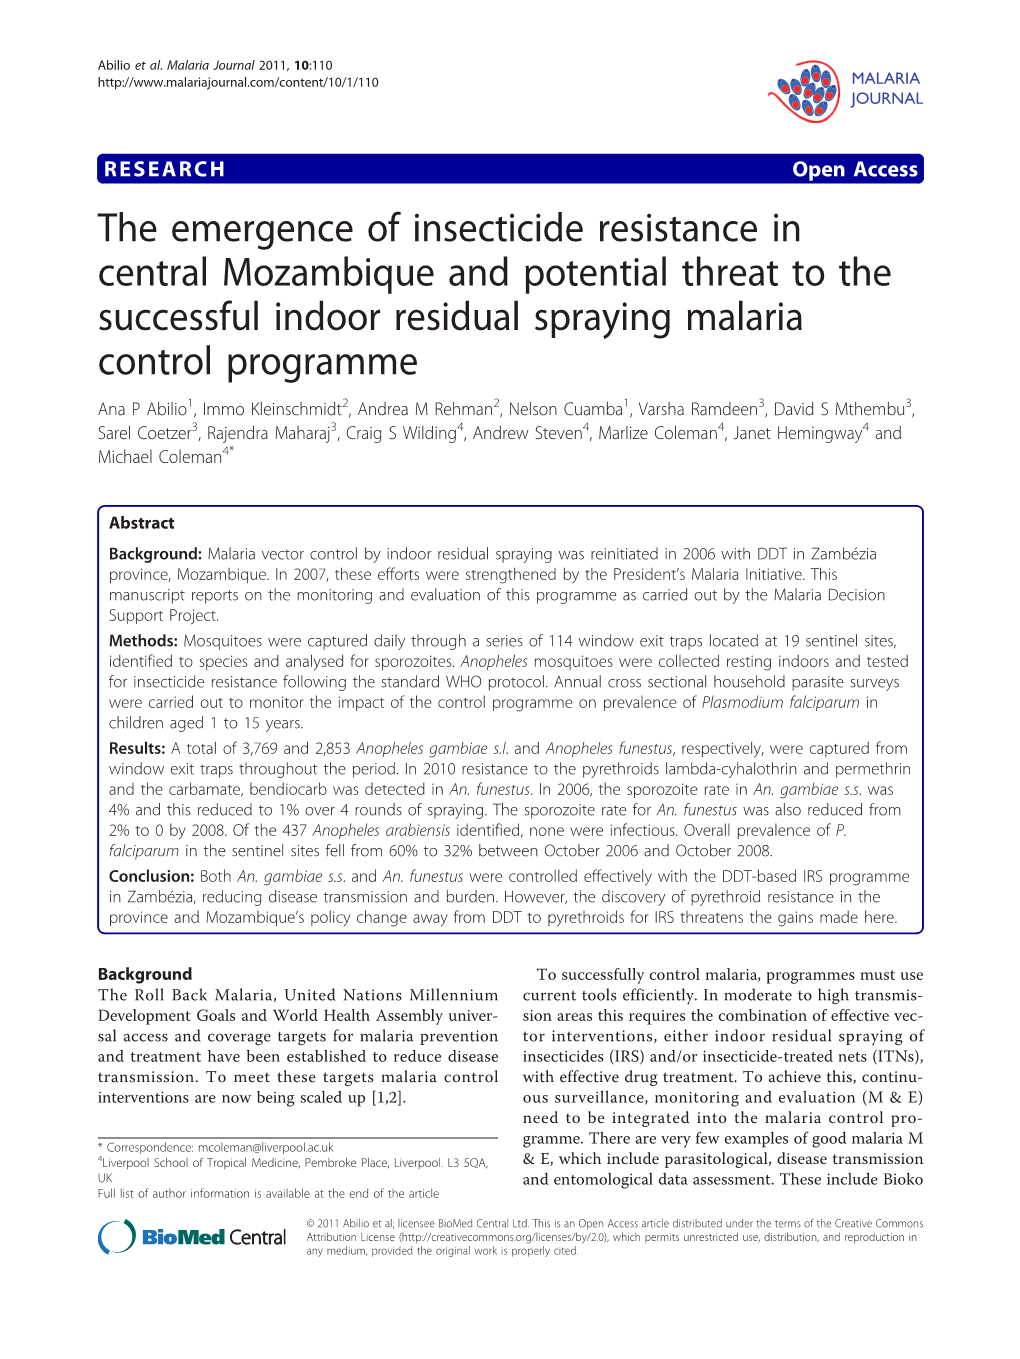 The Emergence of Insecticide Resistance in Central Mozambique